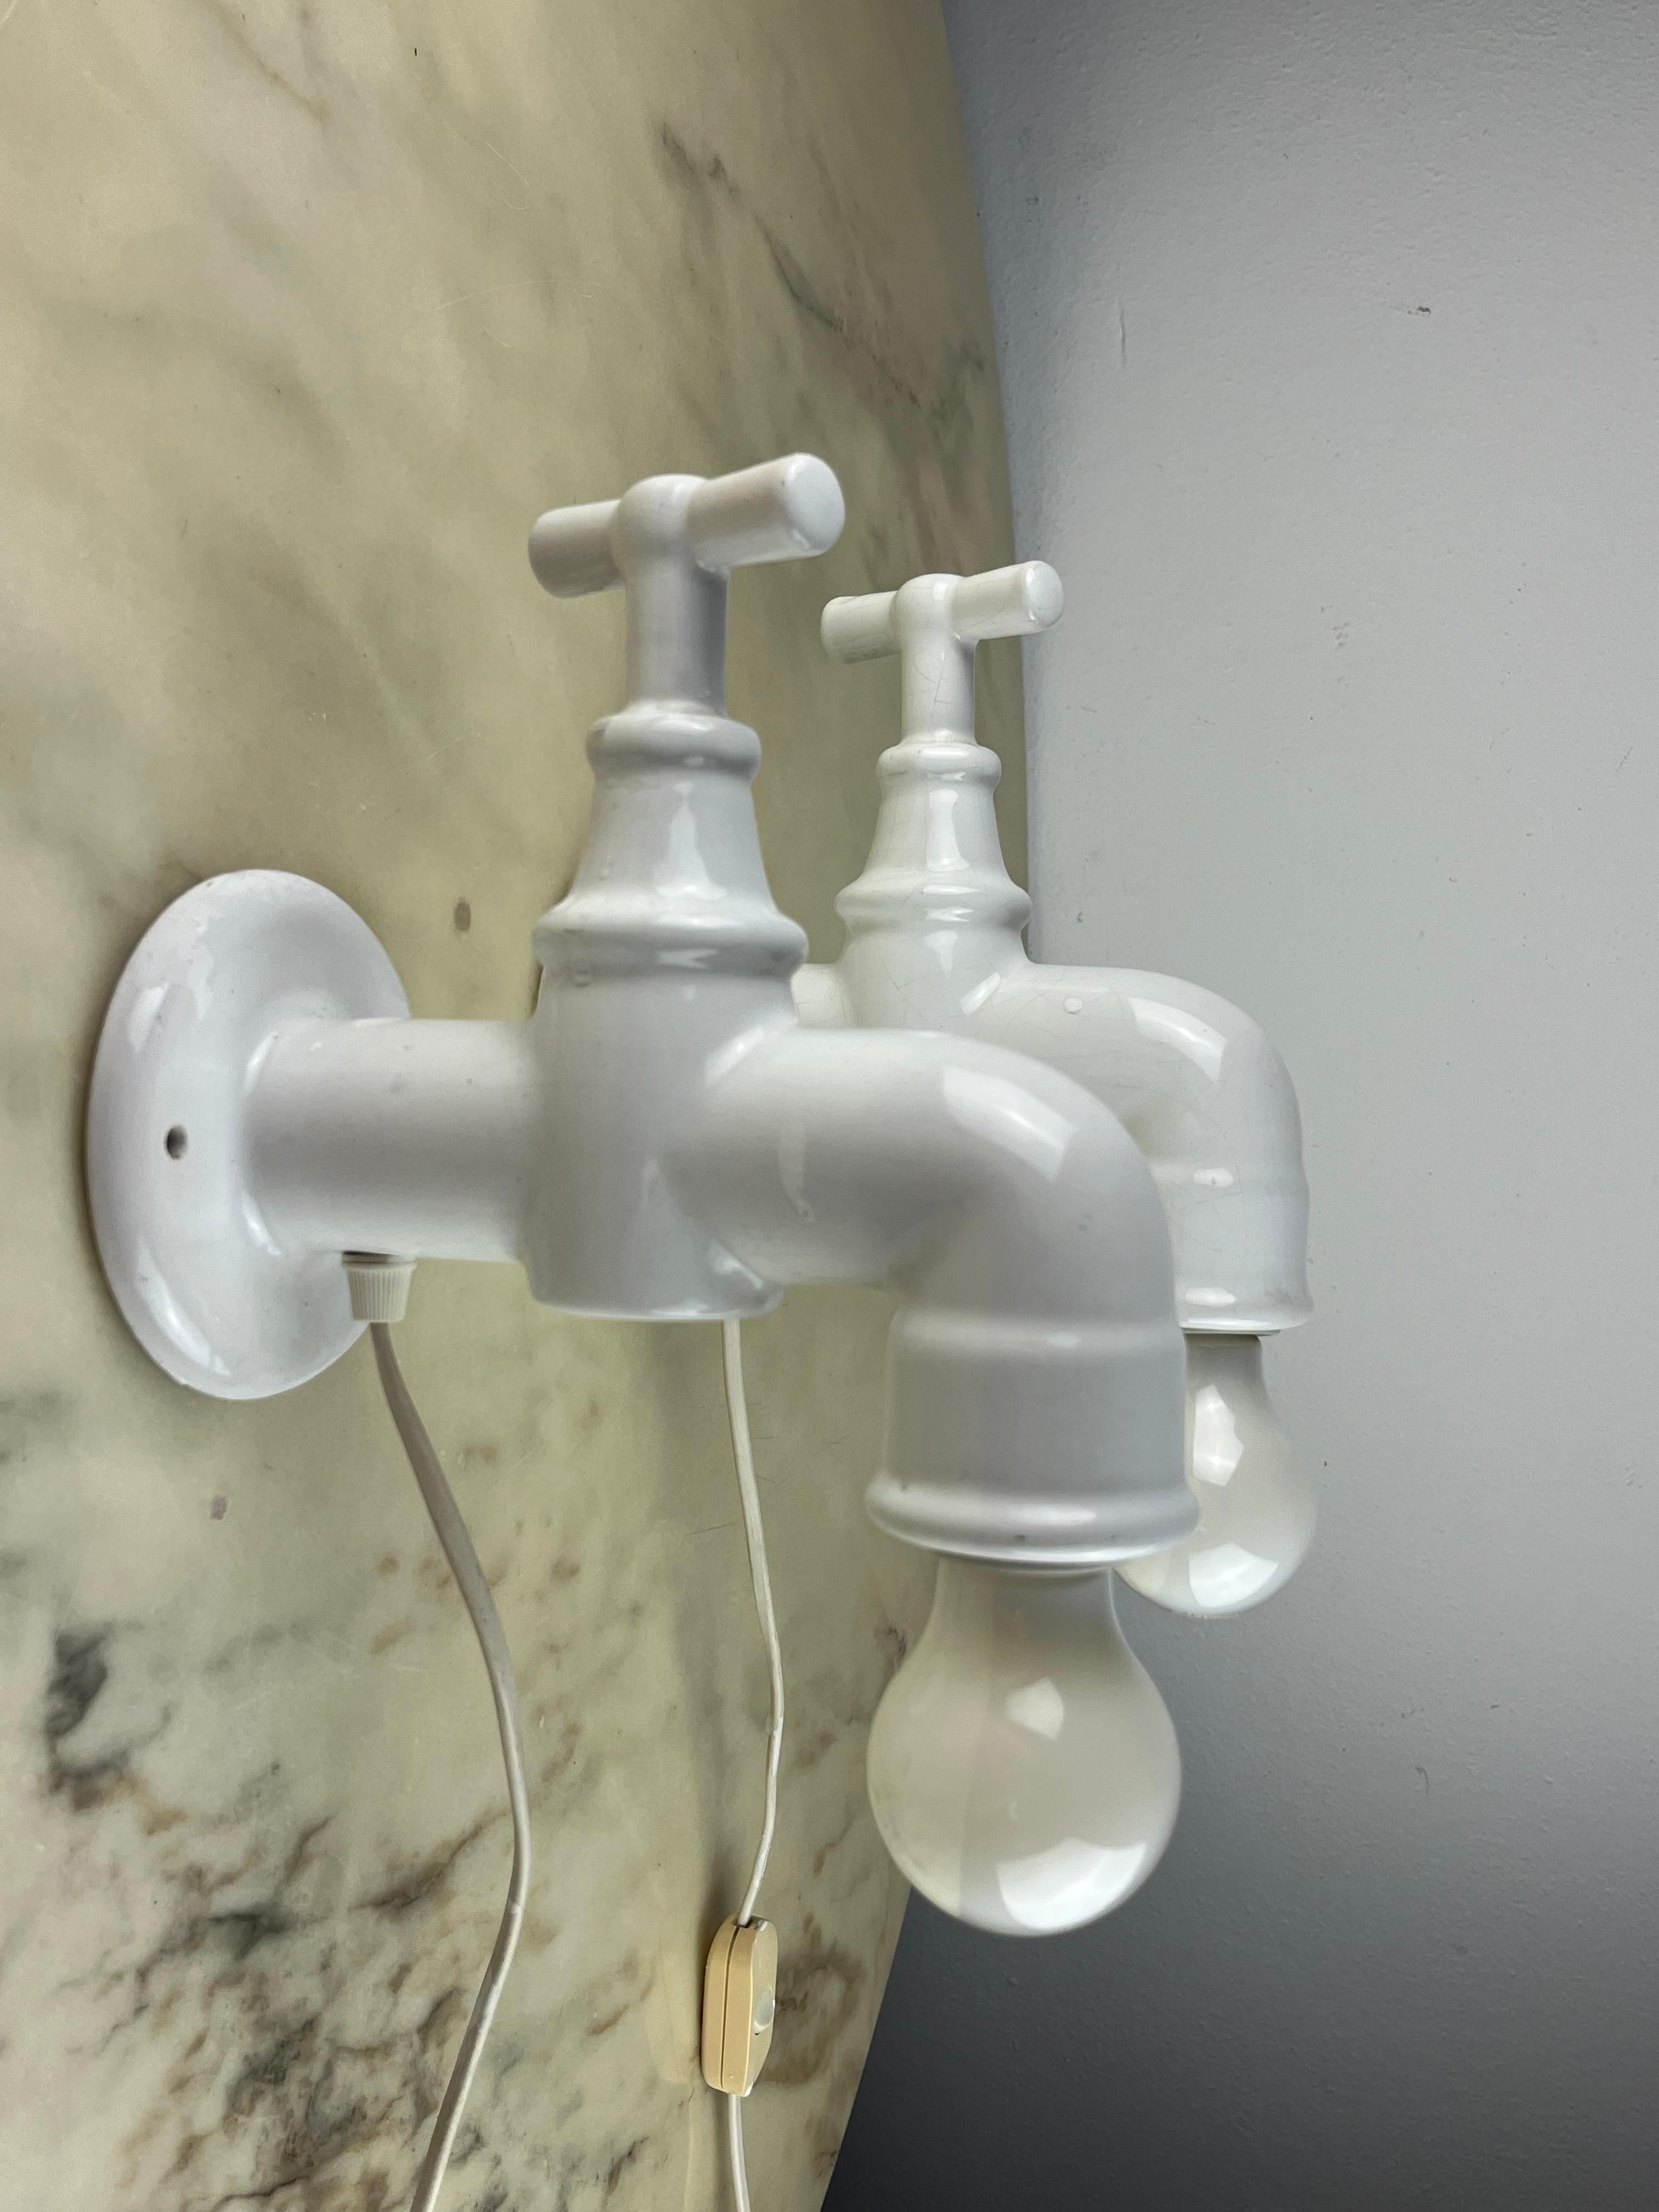 Pair of white porcelain wall lamps, Italy, 1970s
They have the shape of an antique faucet.
Intact and functioning (E27 lamps).
Equipped with period switches and plugs.